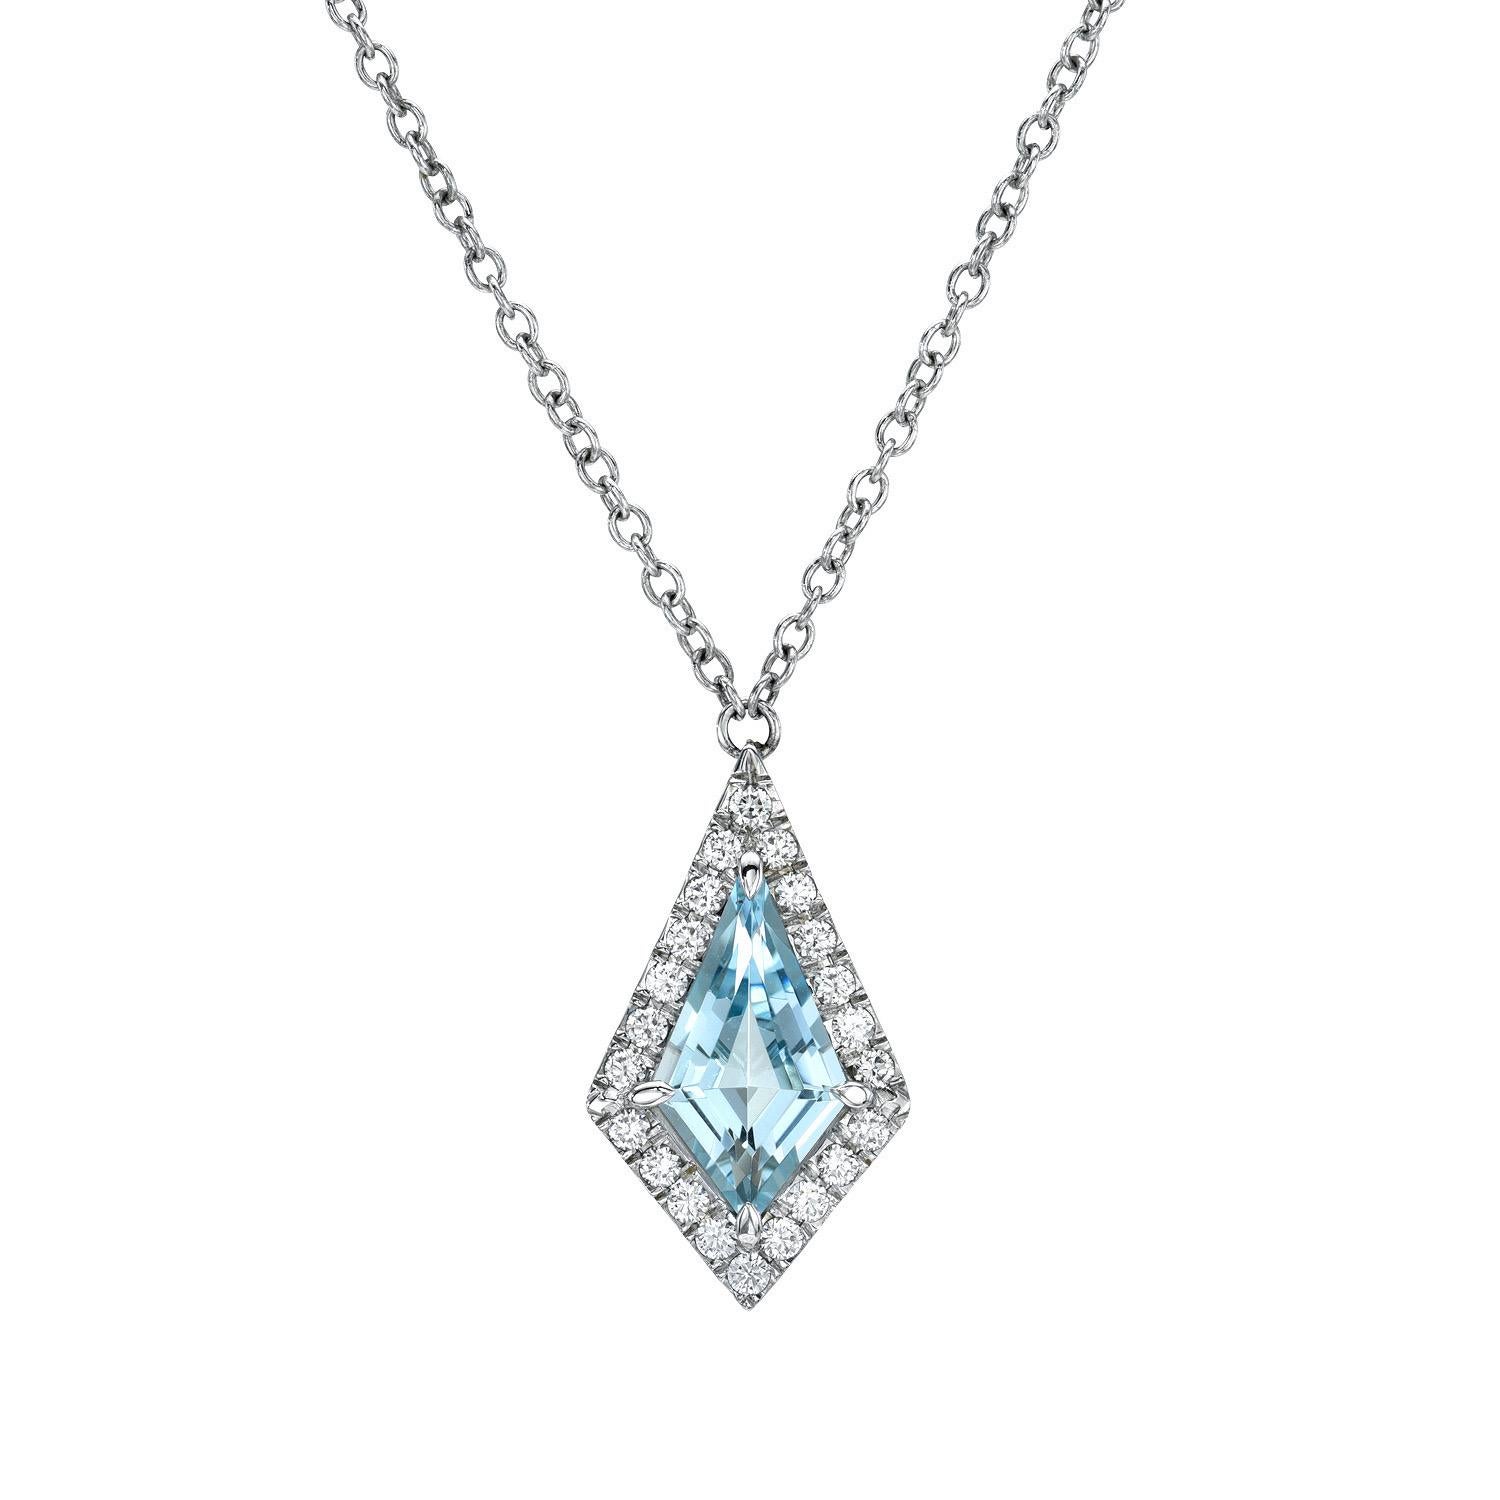 14K white gold necklace set with a 1.97 carat Aquamarine Kite shape, decorated with a total of 0.34 carat round brilliant diamonds.

Returns are accepted and paid by us within 7 days of delivery.

Please FOLLOW the MERKABA storefront to be the first